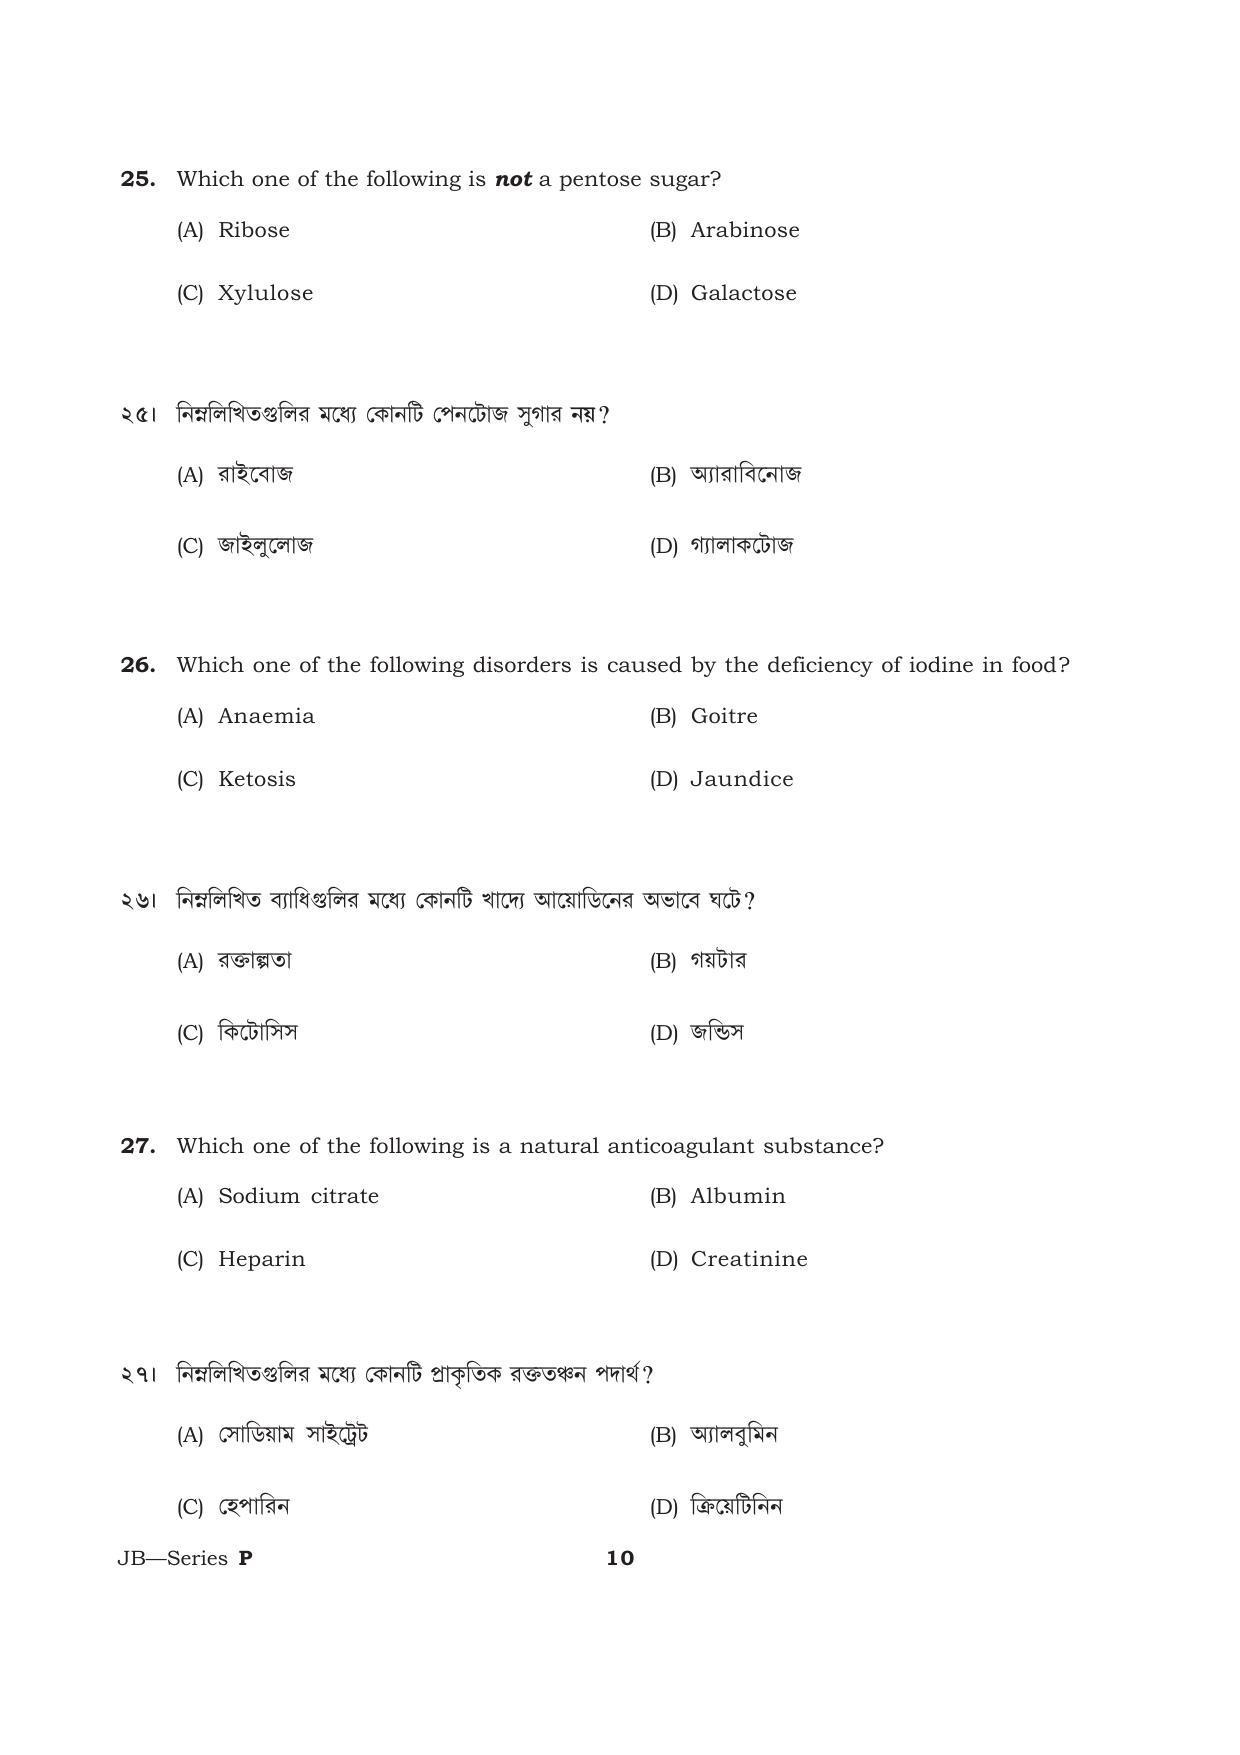 TBJEE Question Paper 2021 - Biology - Page 10